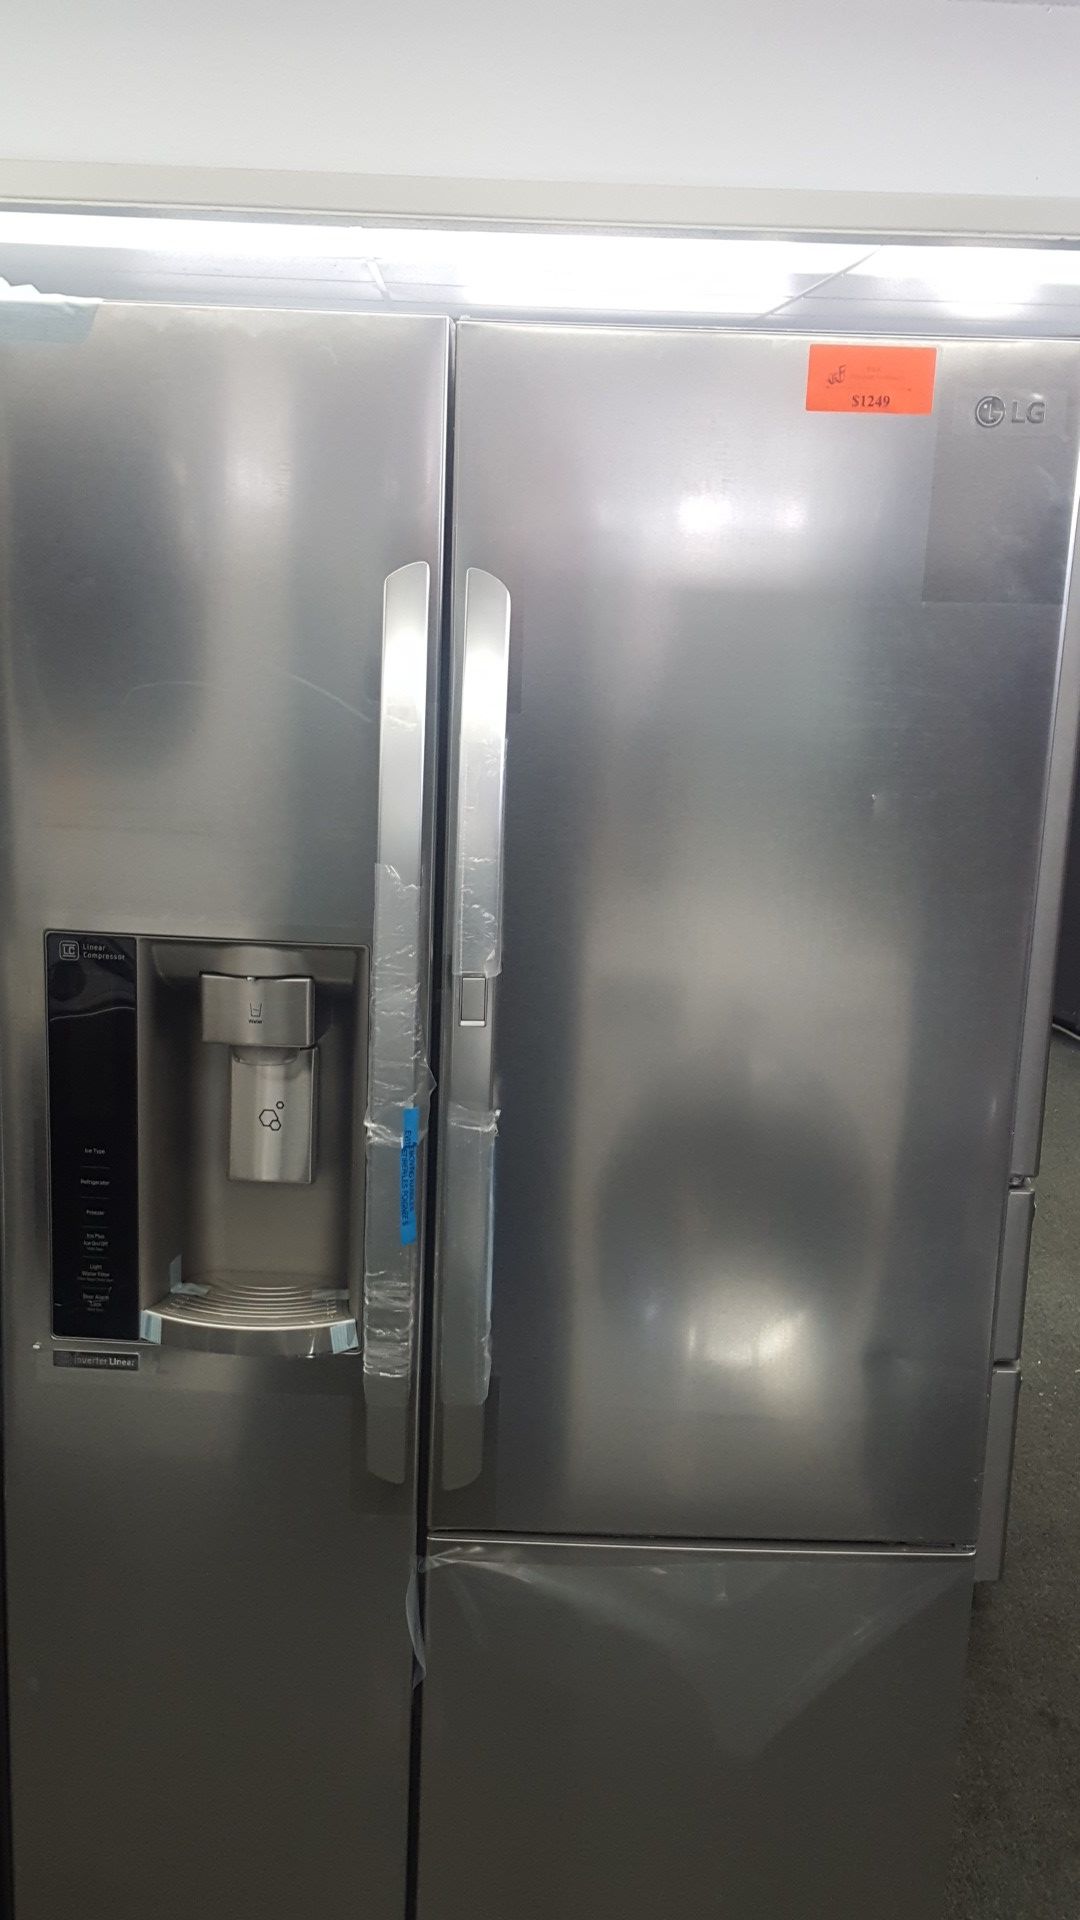 LG scratch and dent side by side refrigerator